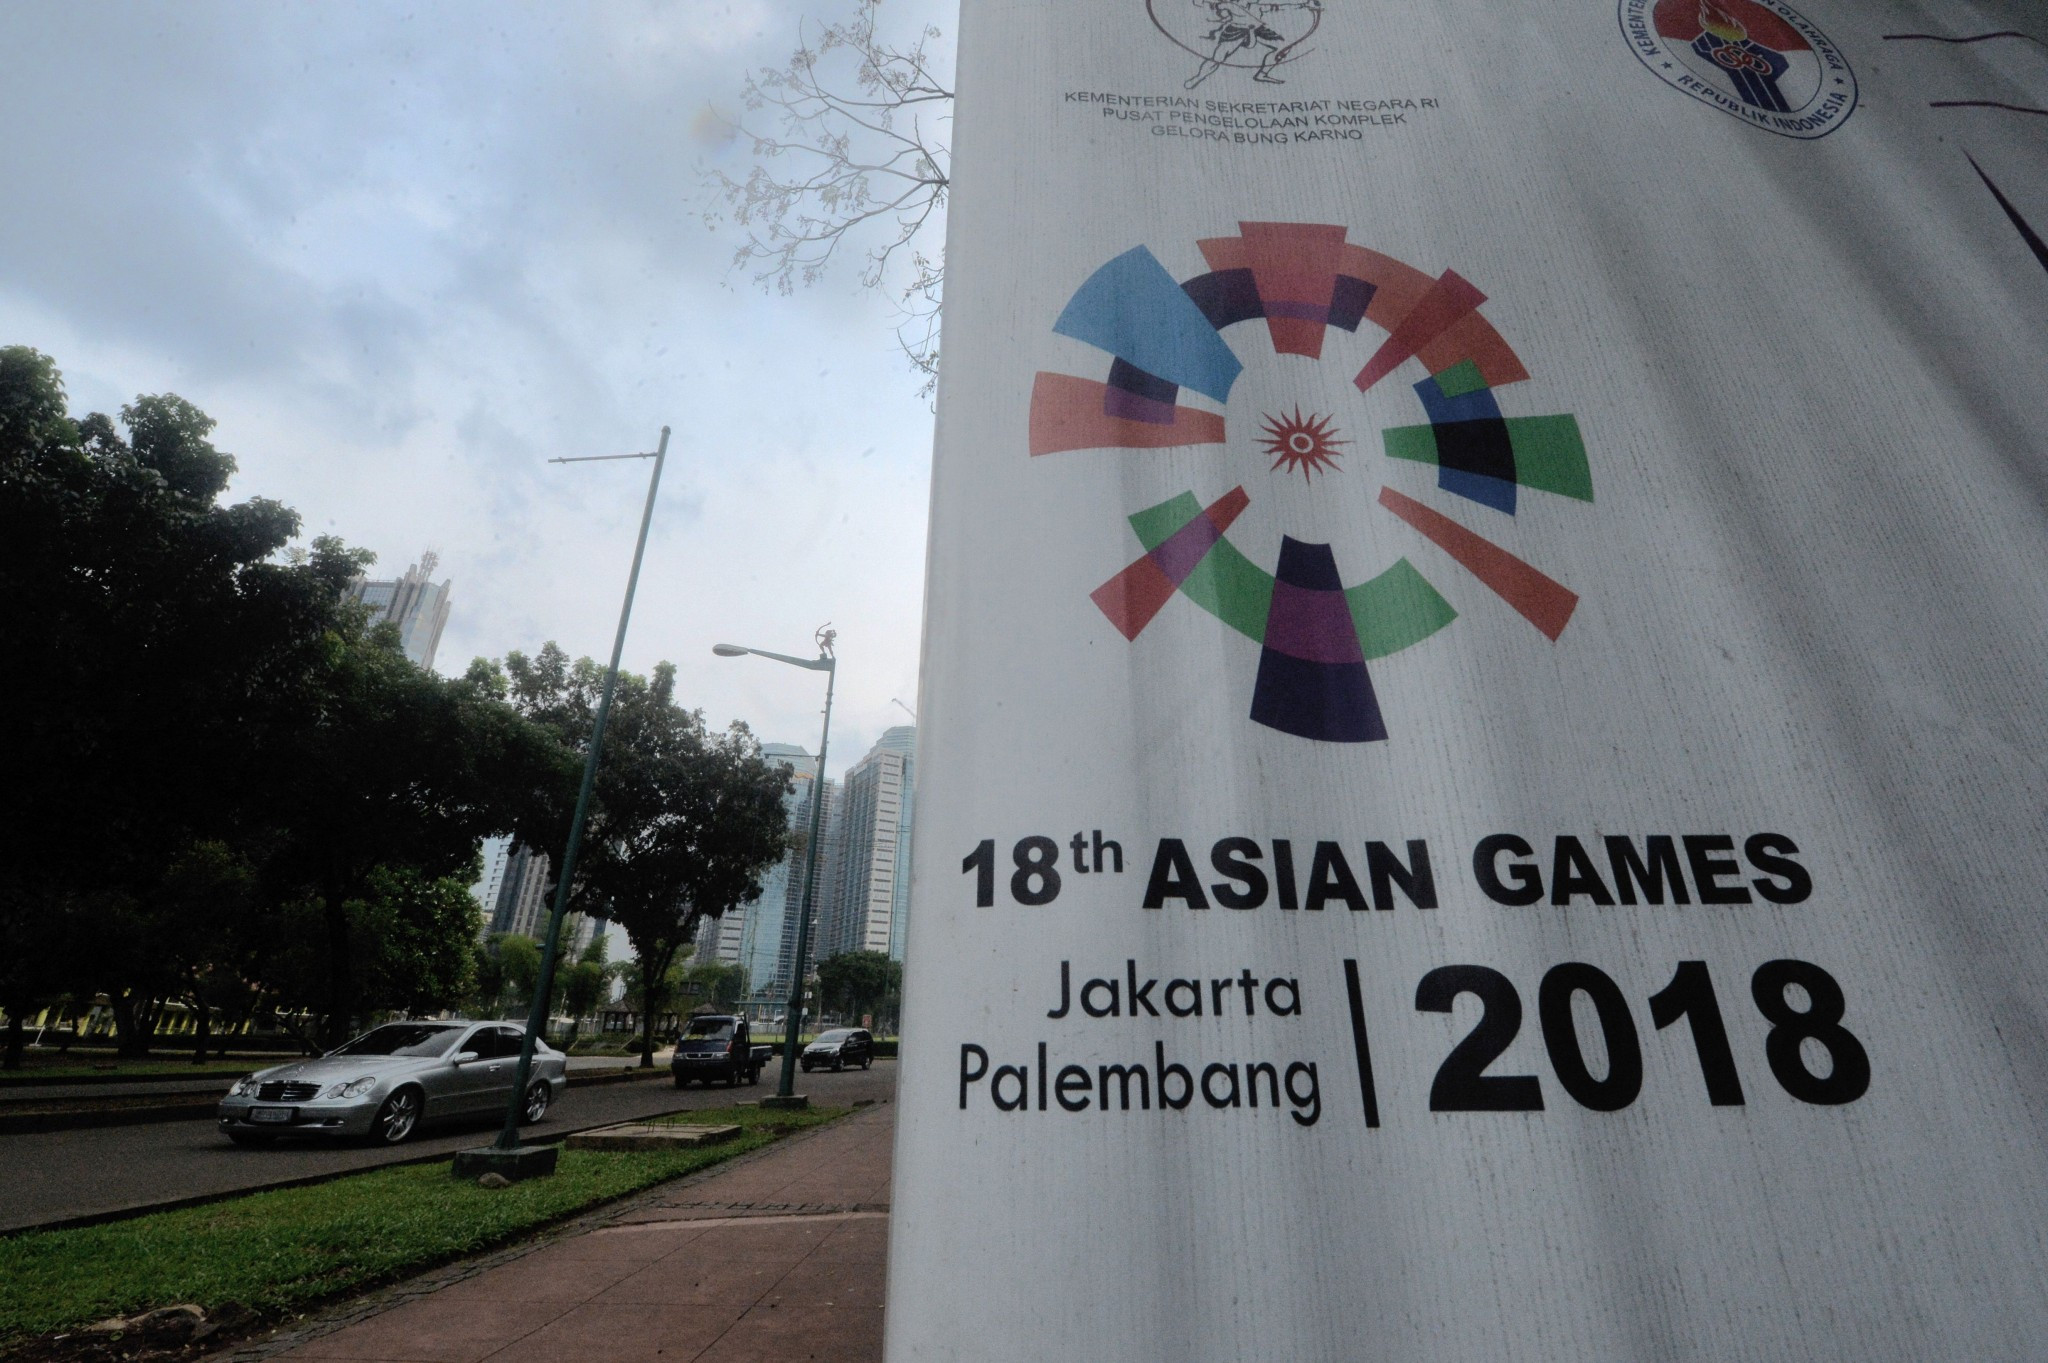 Preparations are continuing to the 2018 Asian Games in Jakarta and Palembang ©Getty Images